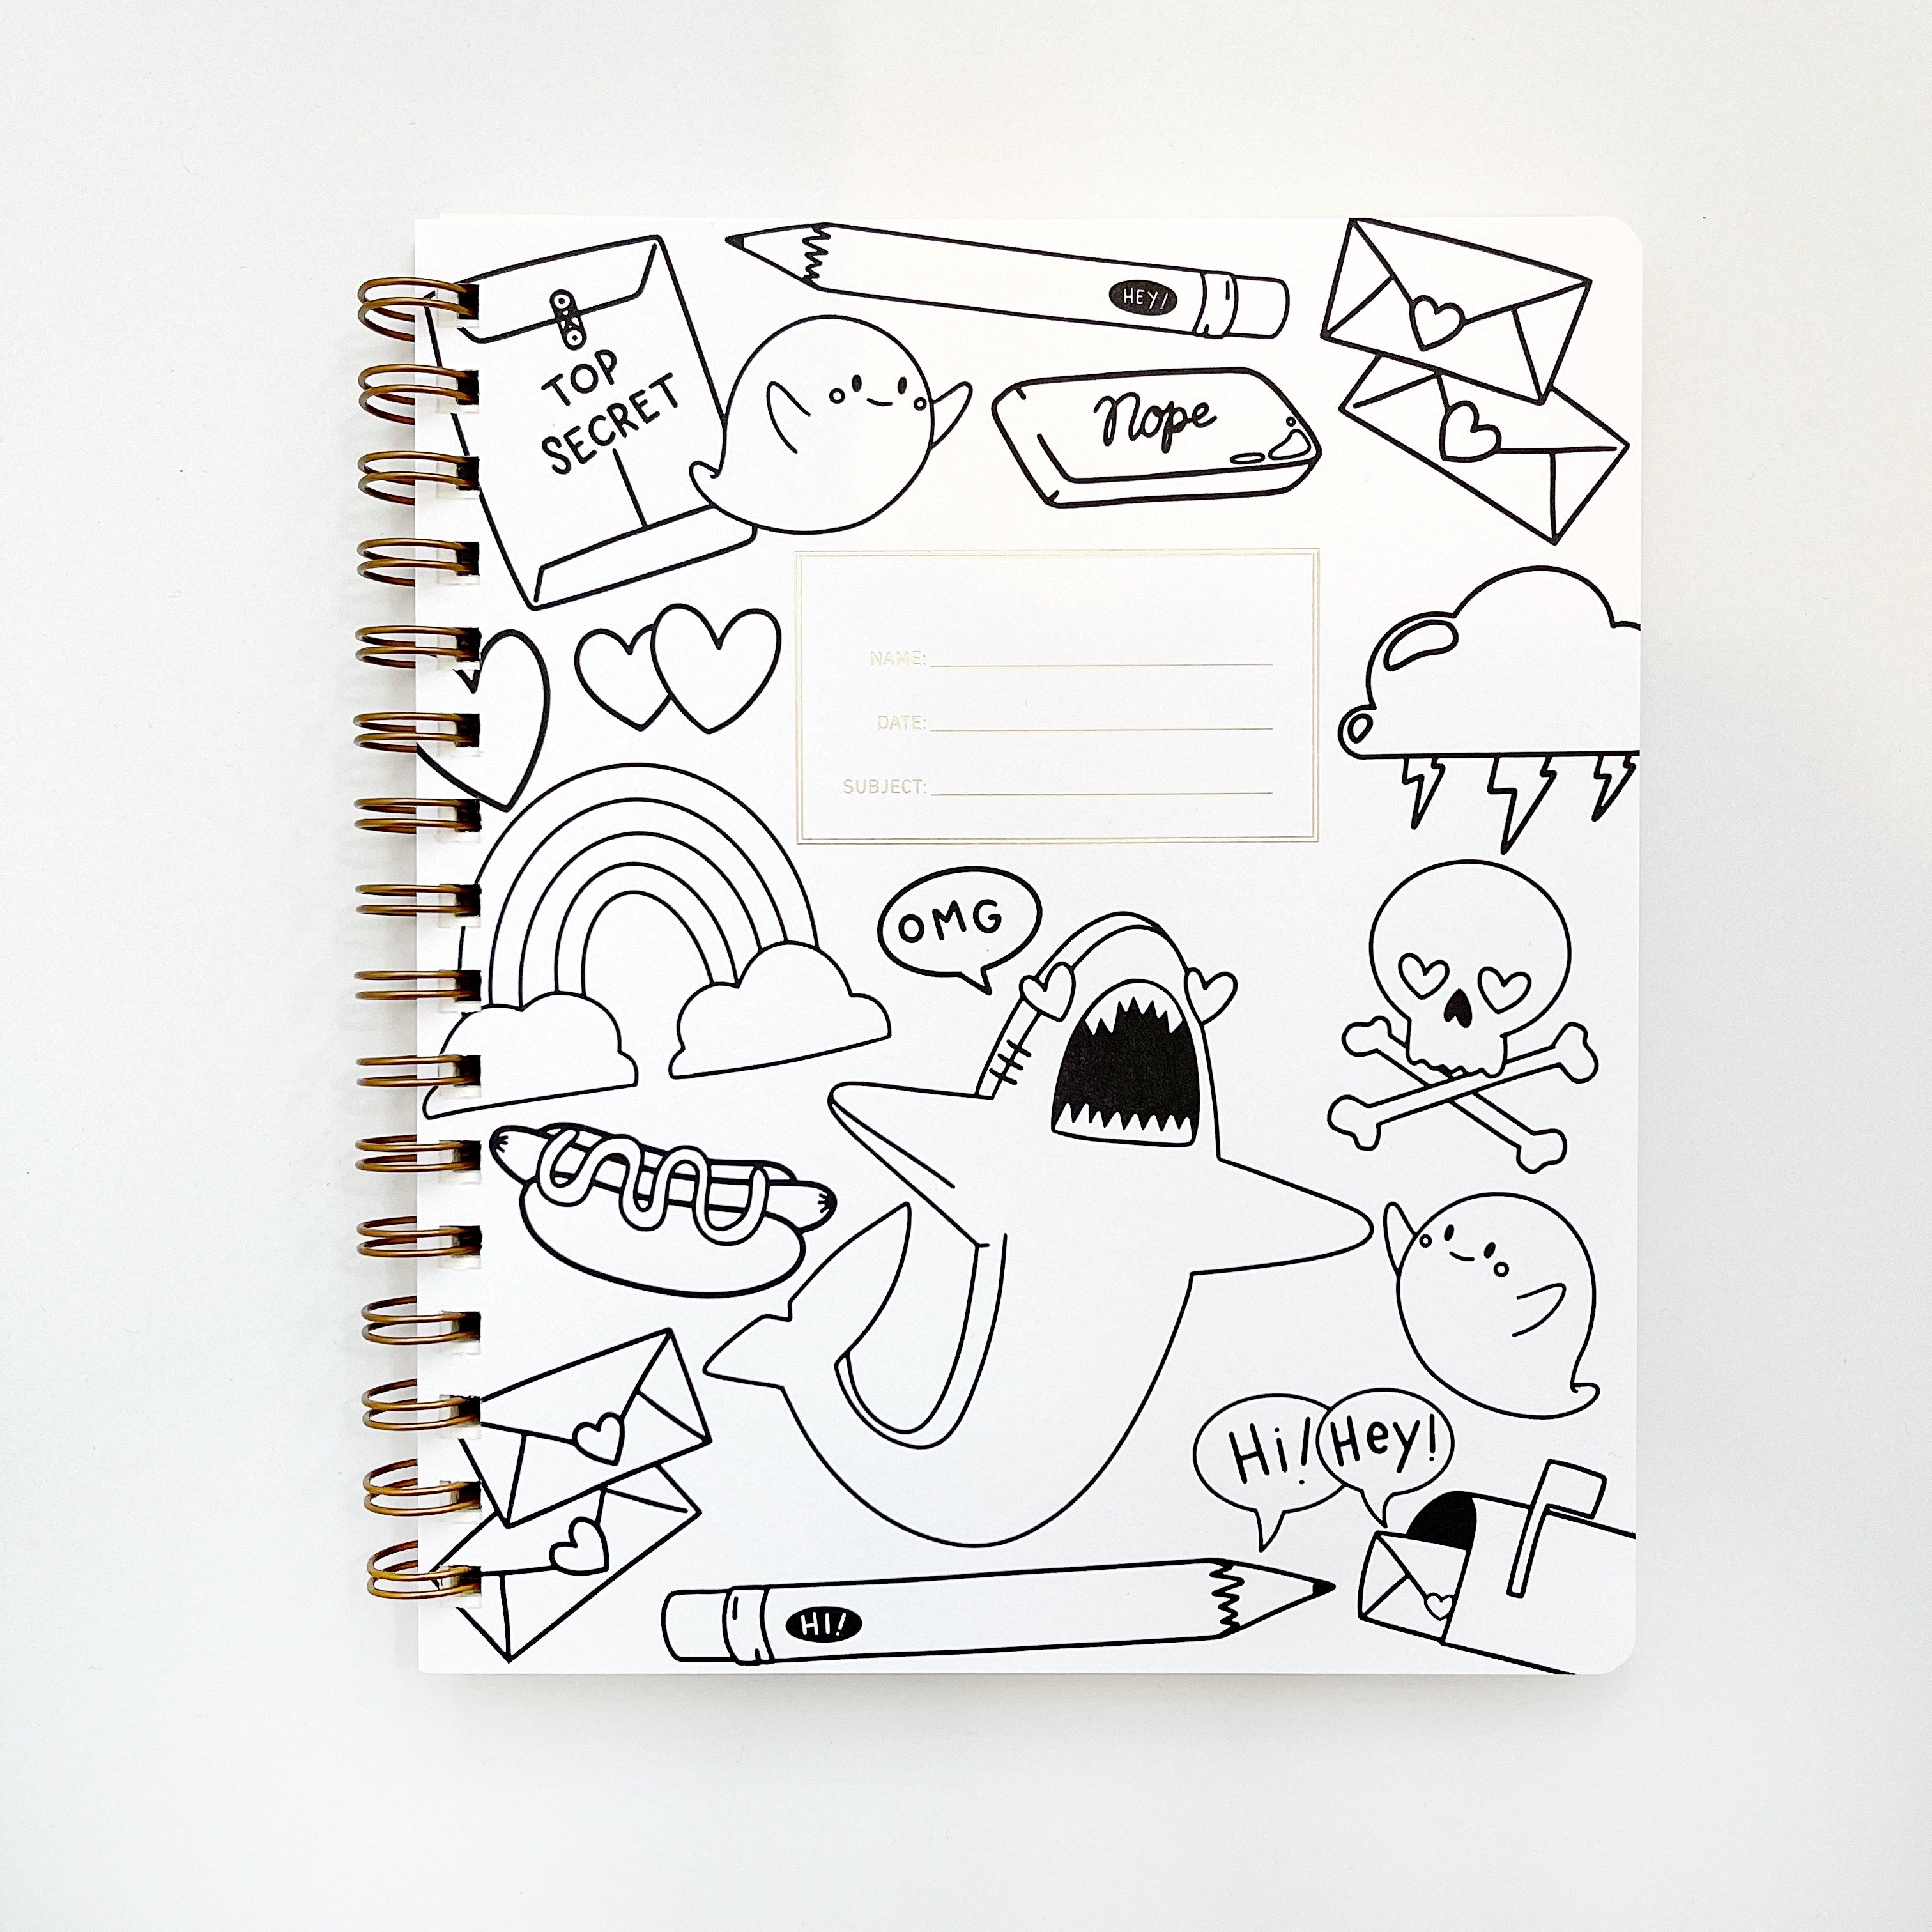 Image of notebook cover with white background and black outlines of shark, cloud, letters, pencil, skull, mailbox, eraser and hot dog. 